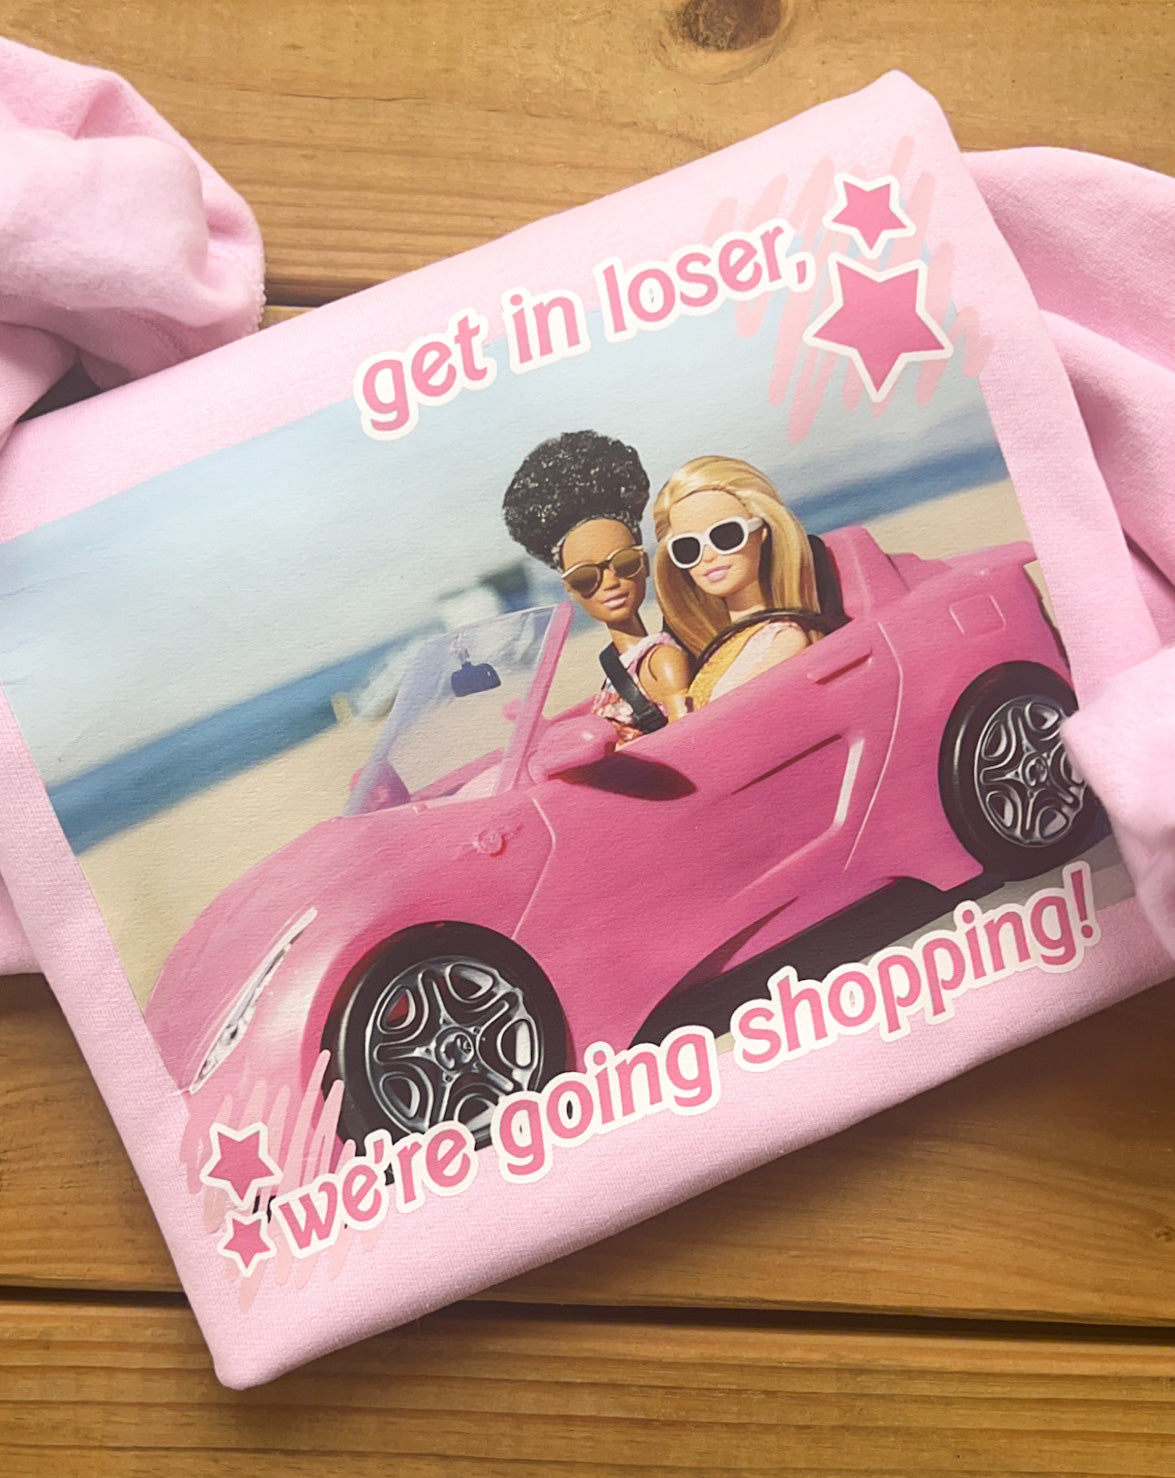 Come on Barbie, Let’s Go Shopping Sweatshirt